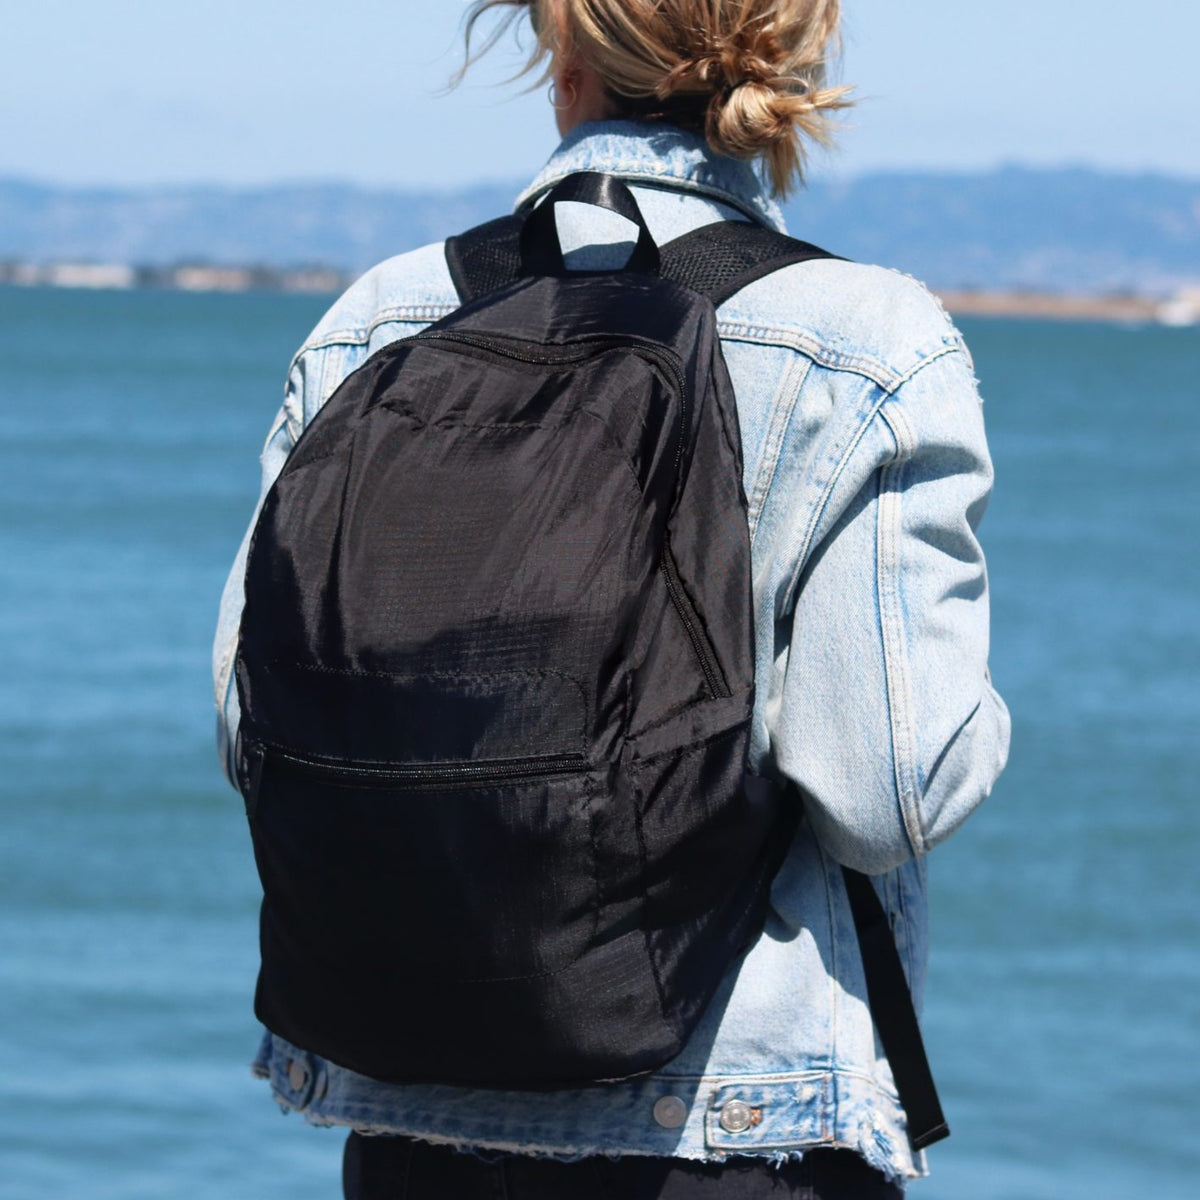 Lifestyle photo of a woman on the coast with the Brandless foldable backpack on her back.